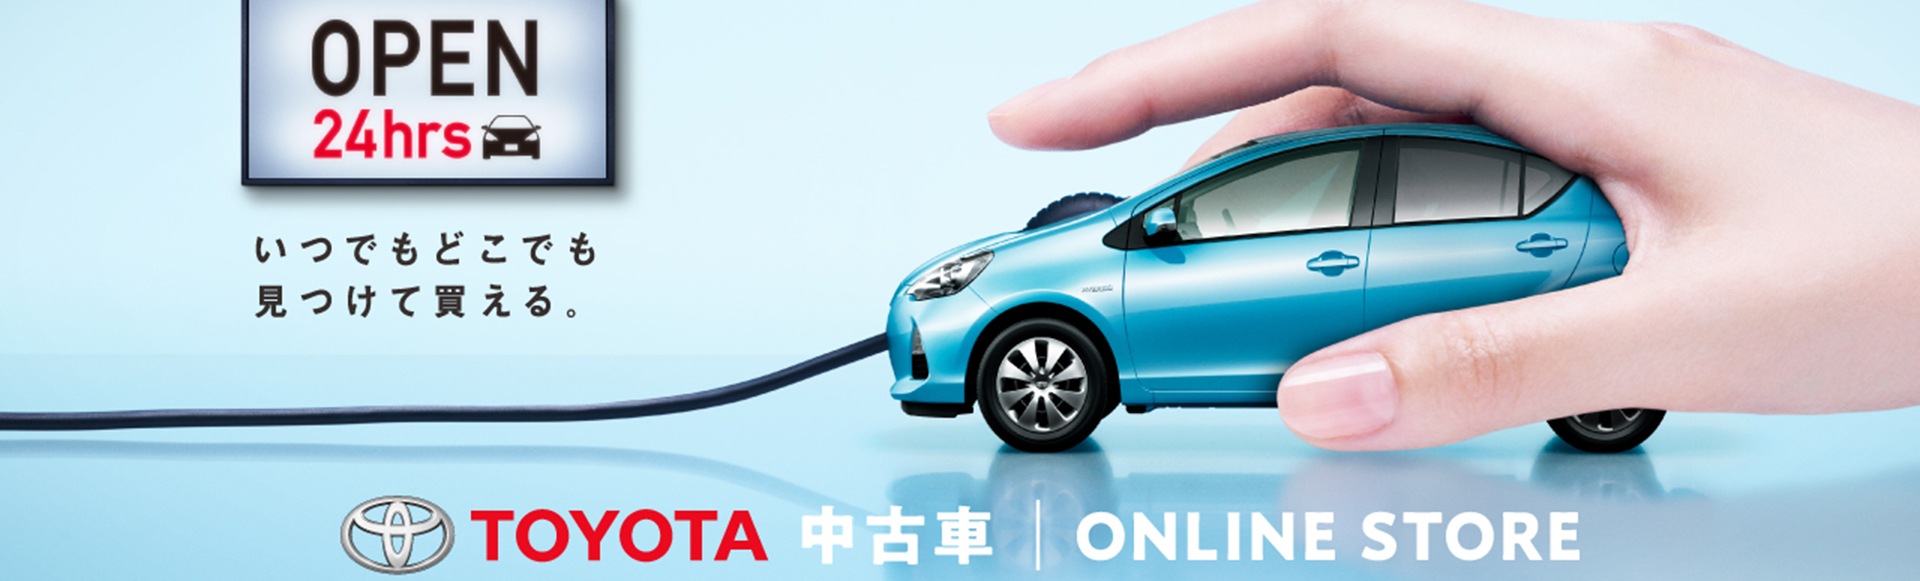 Toyota Launches Used Vehicle Online Store in Japan